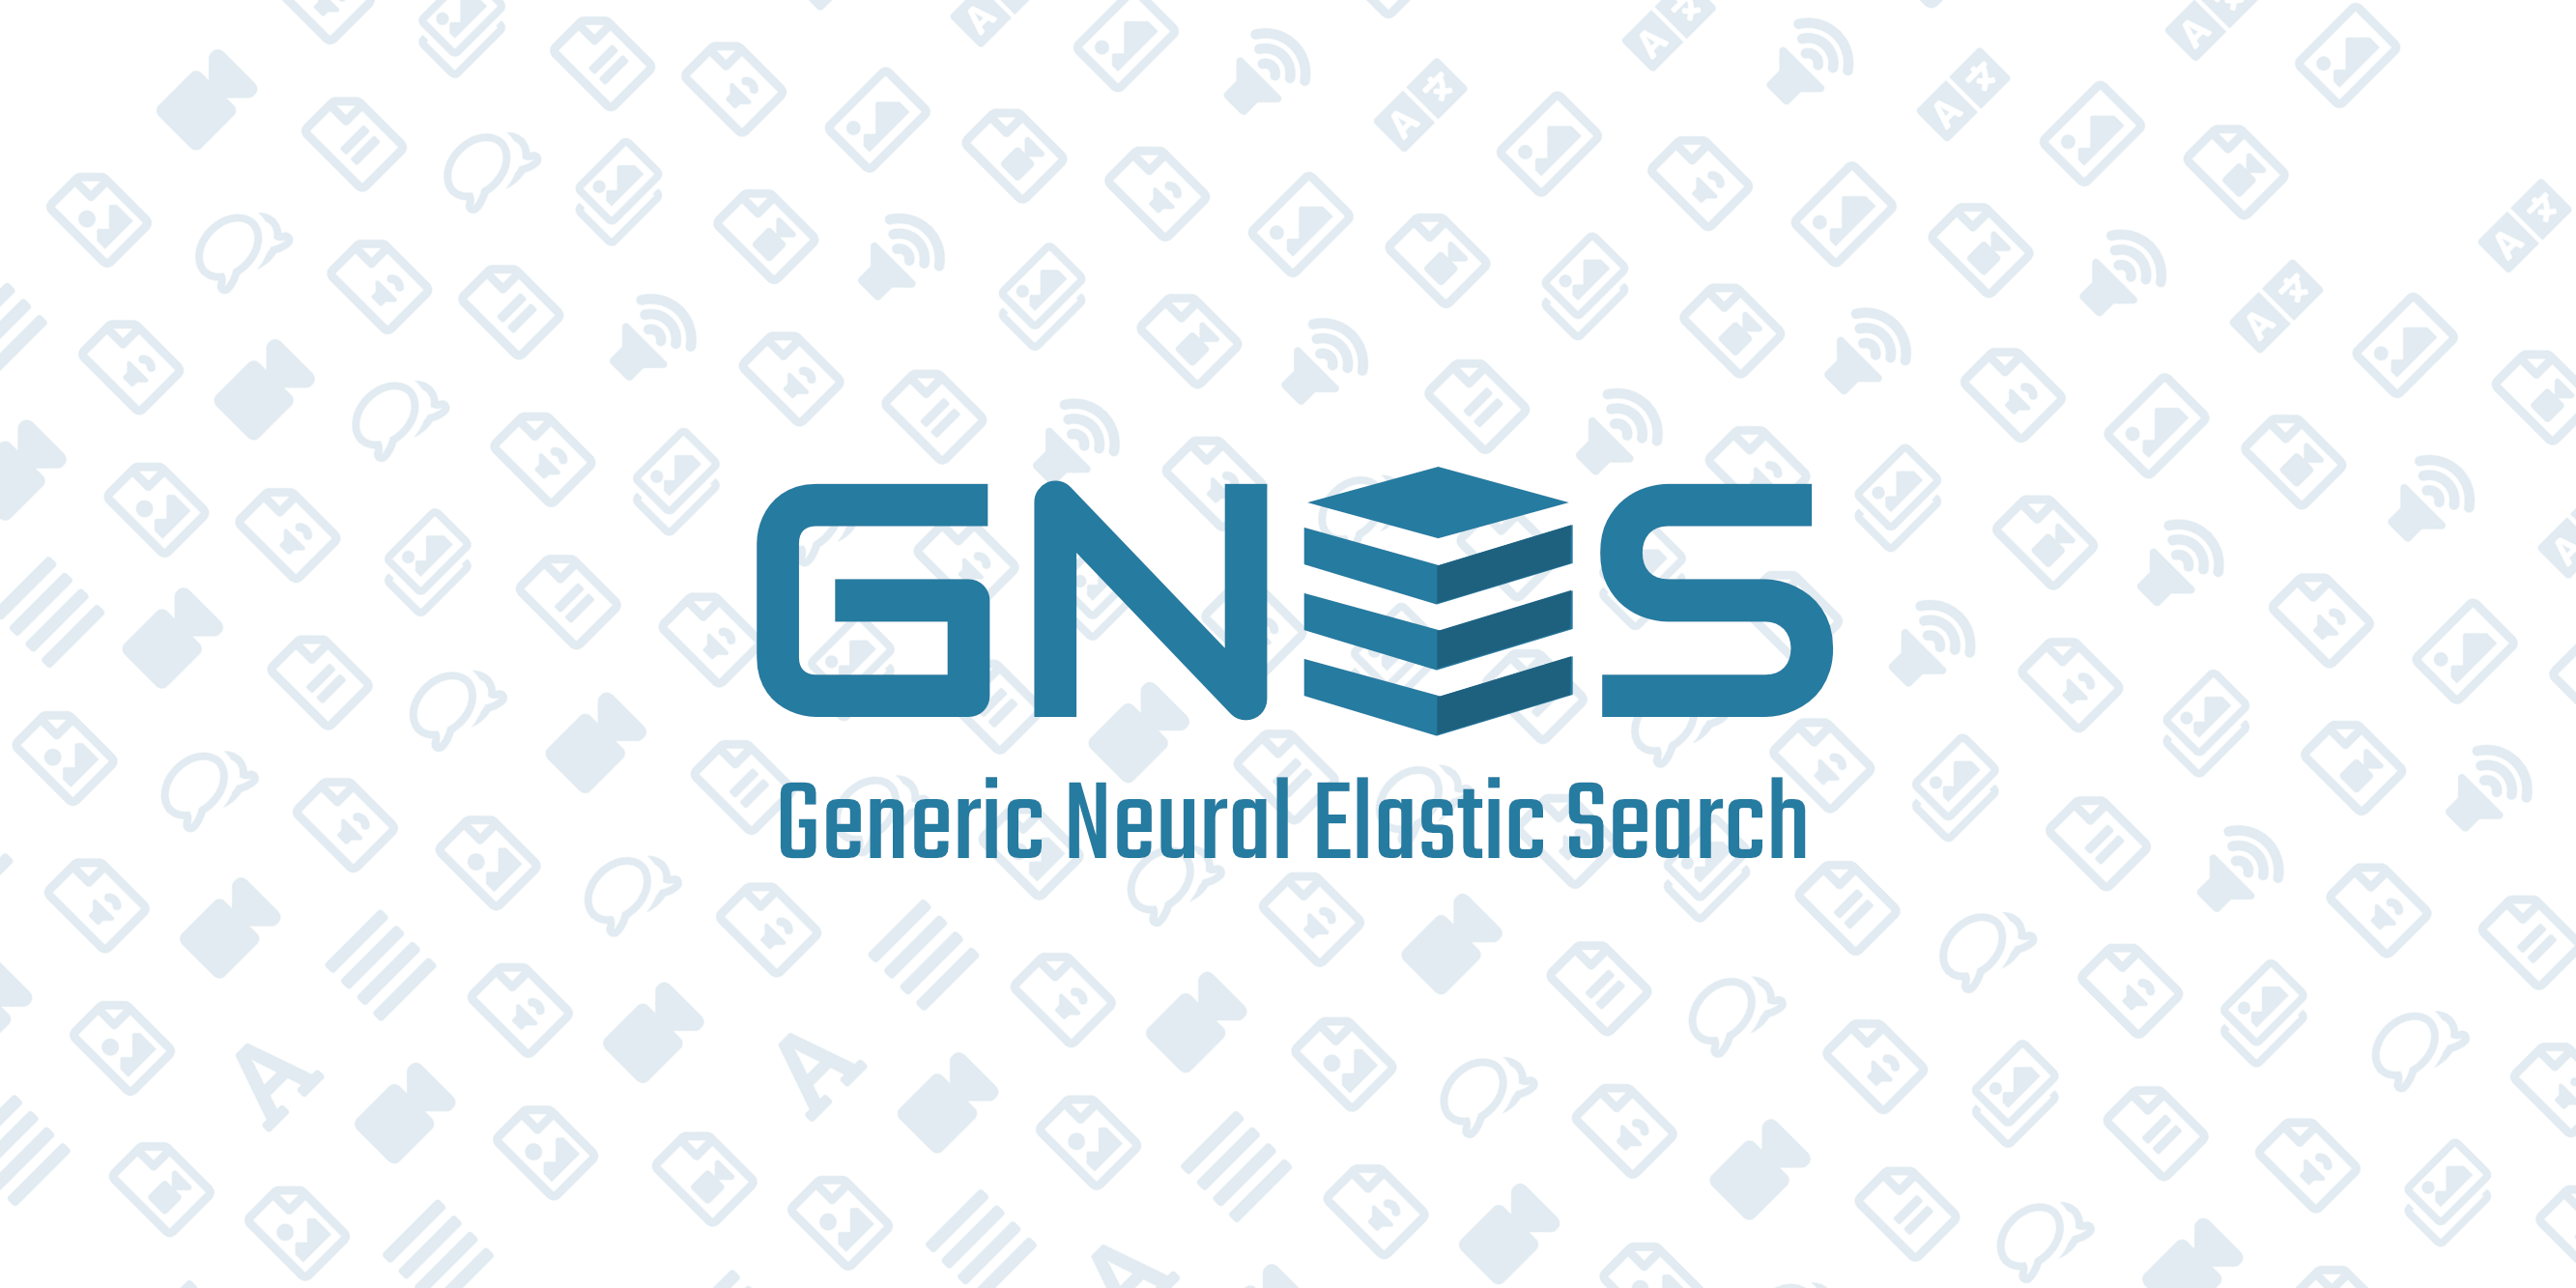 GNES Generic Neural Elastic Search, logo made by Han Xiao